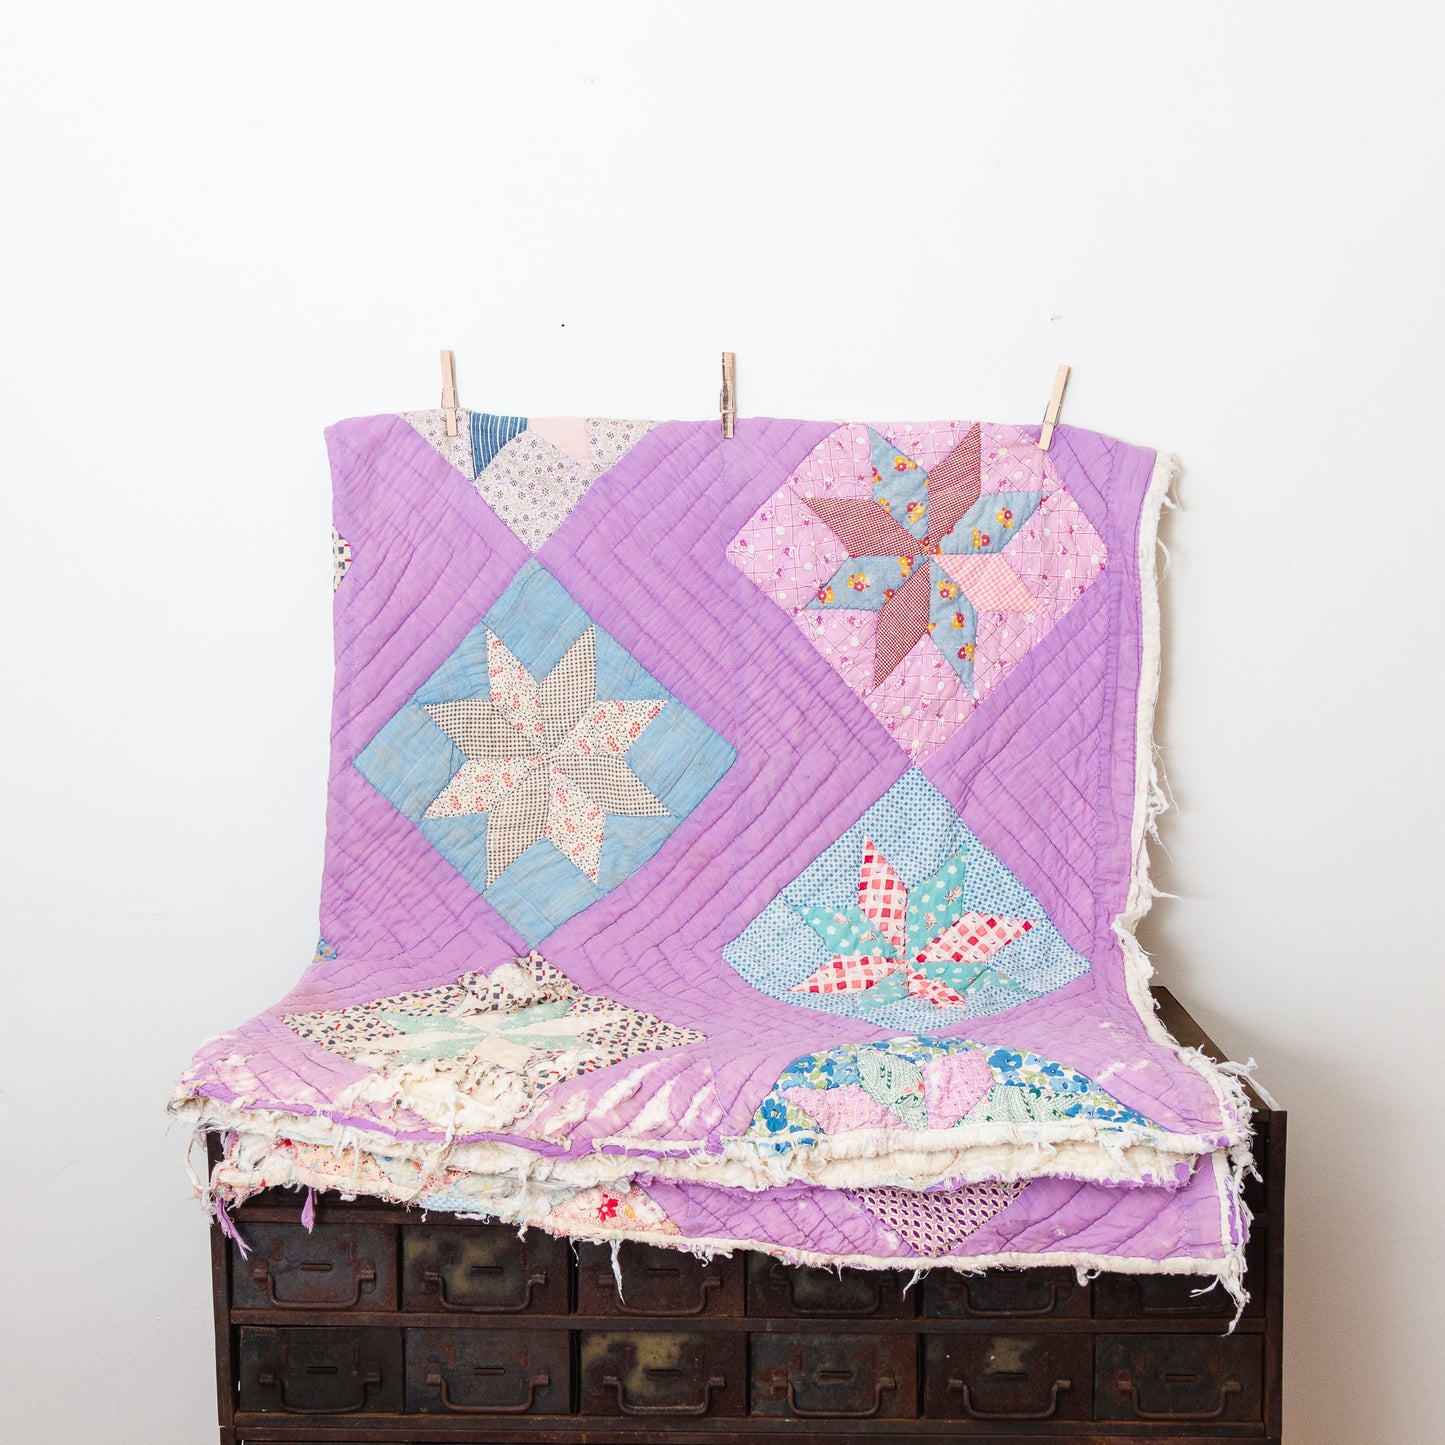 Eight Point Star Hand Stitched Quilt Vintage Purple Patchwork Farmhouse Decor - Eagle's Eye Finds